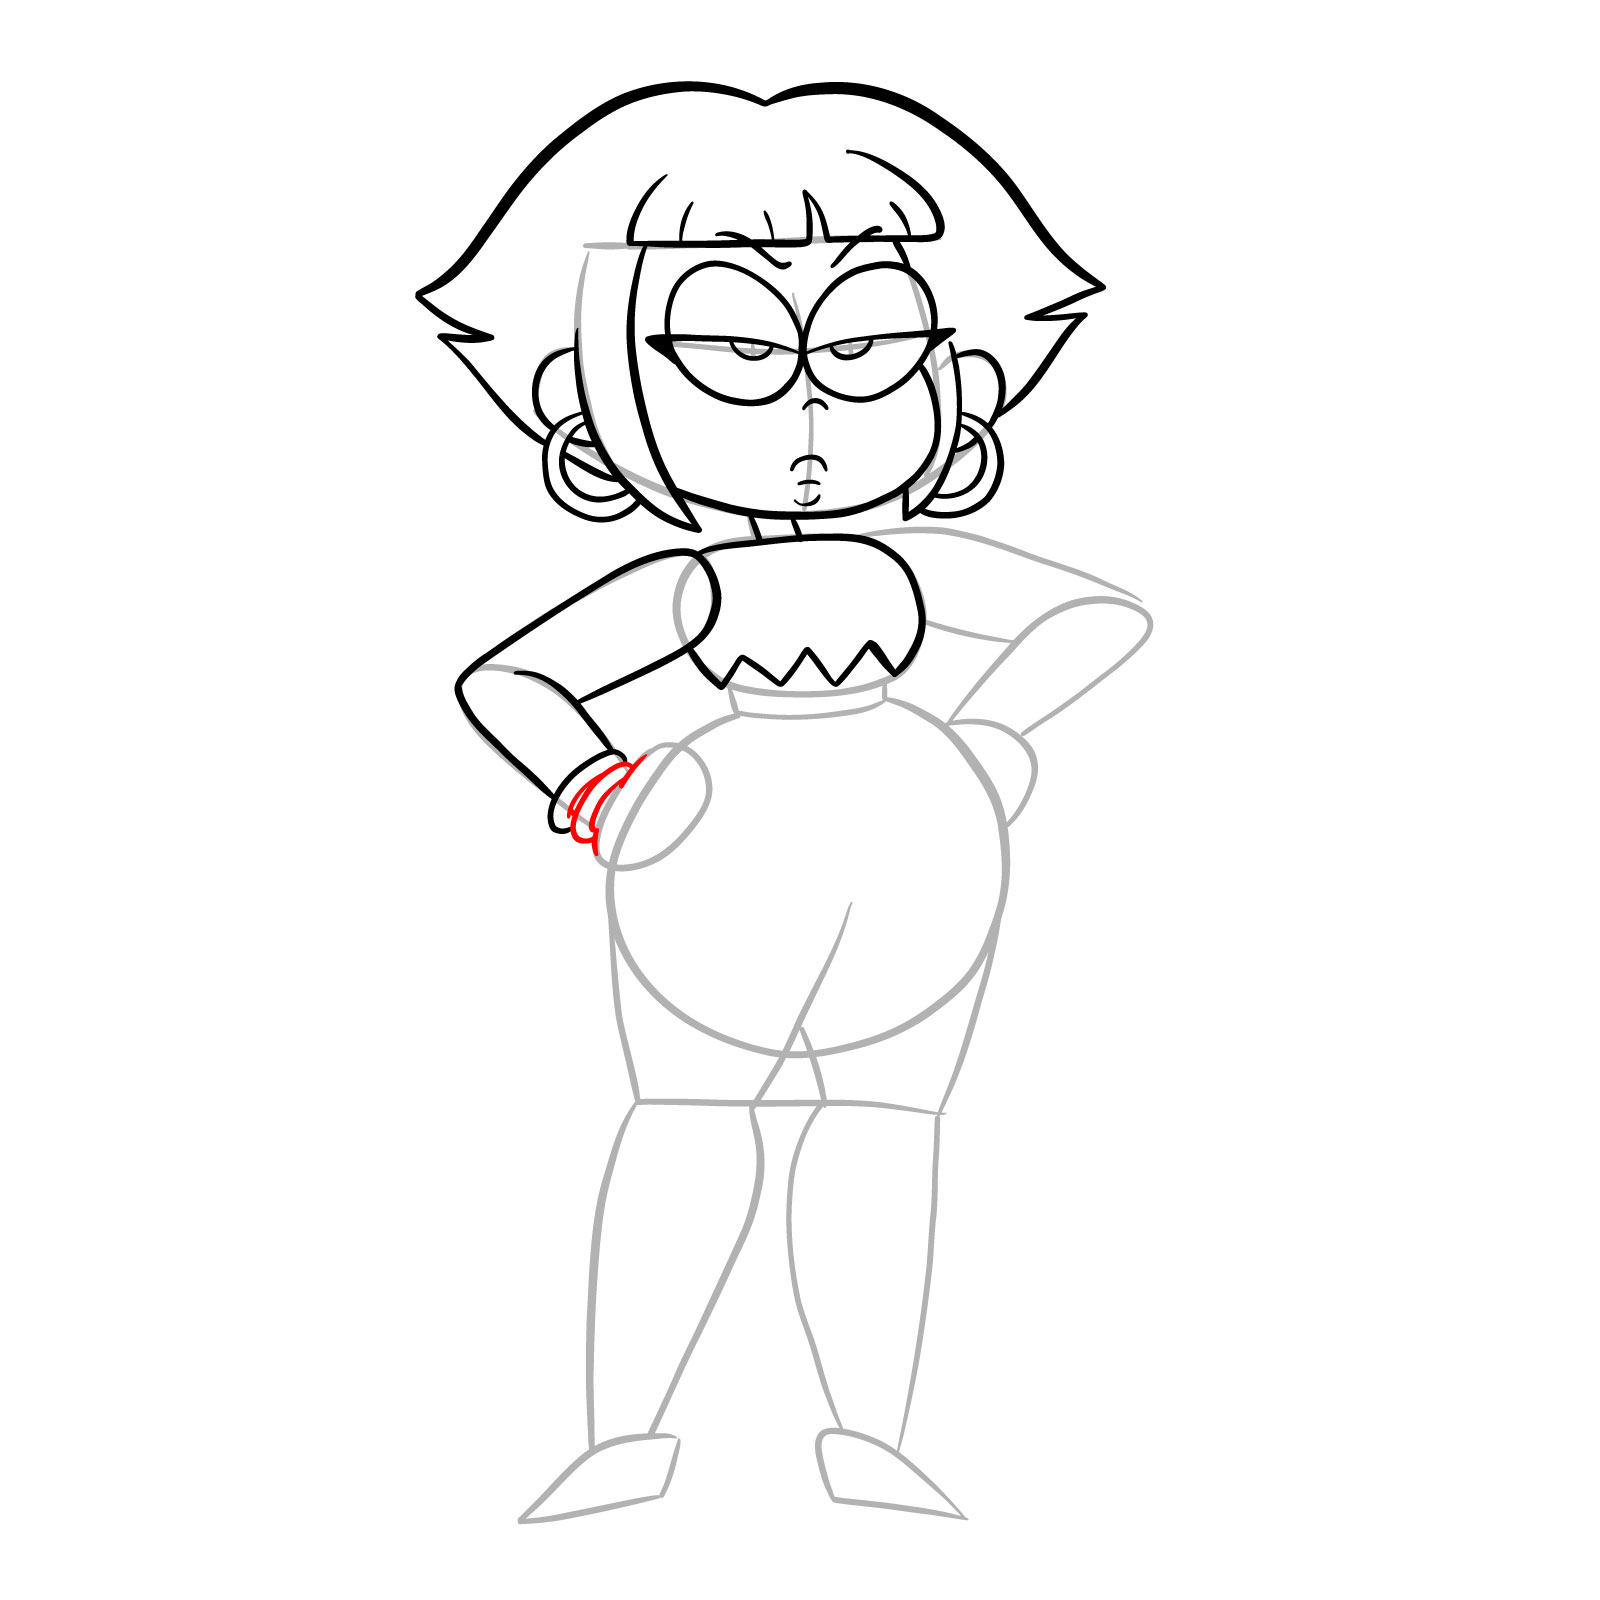 How to draw Human Shannon from OK K.O.! - step 18